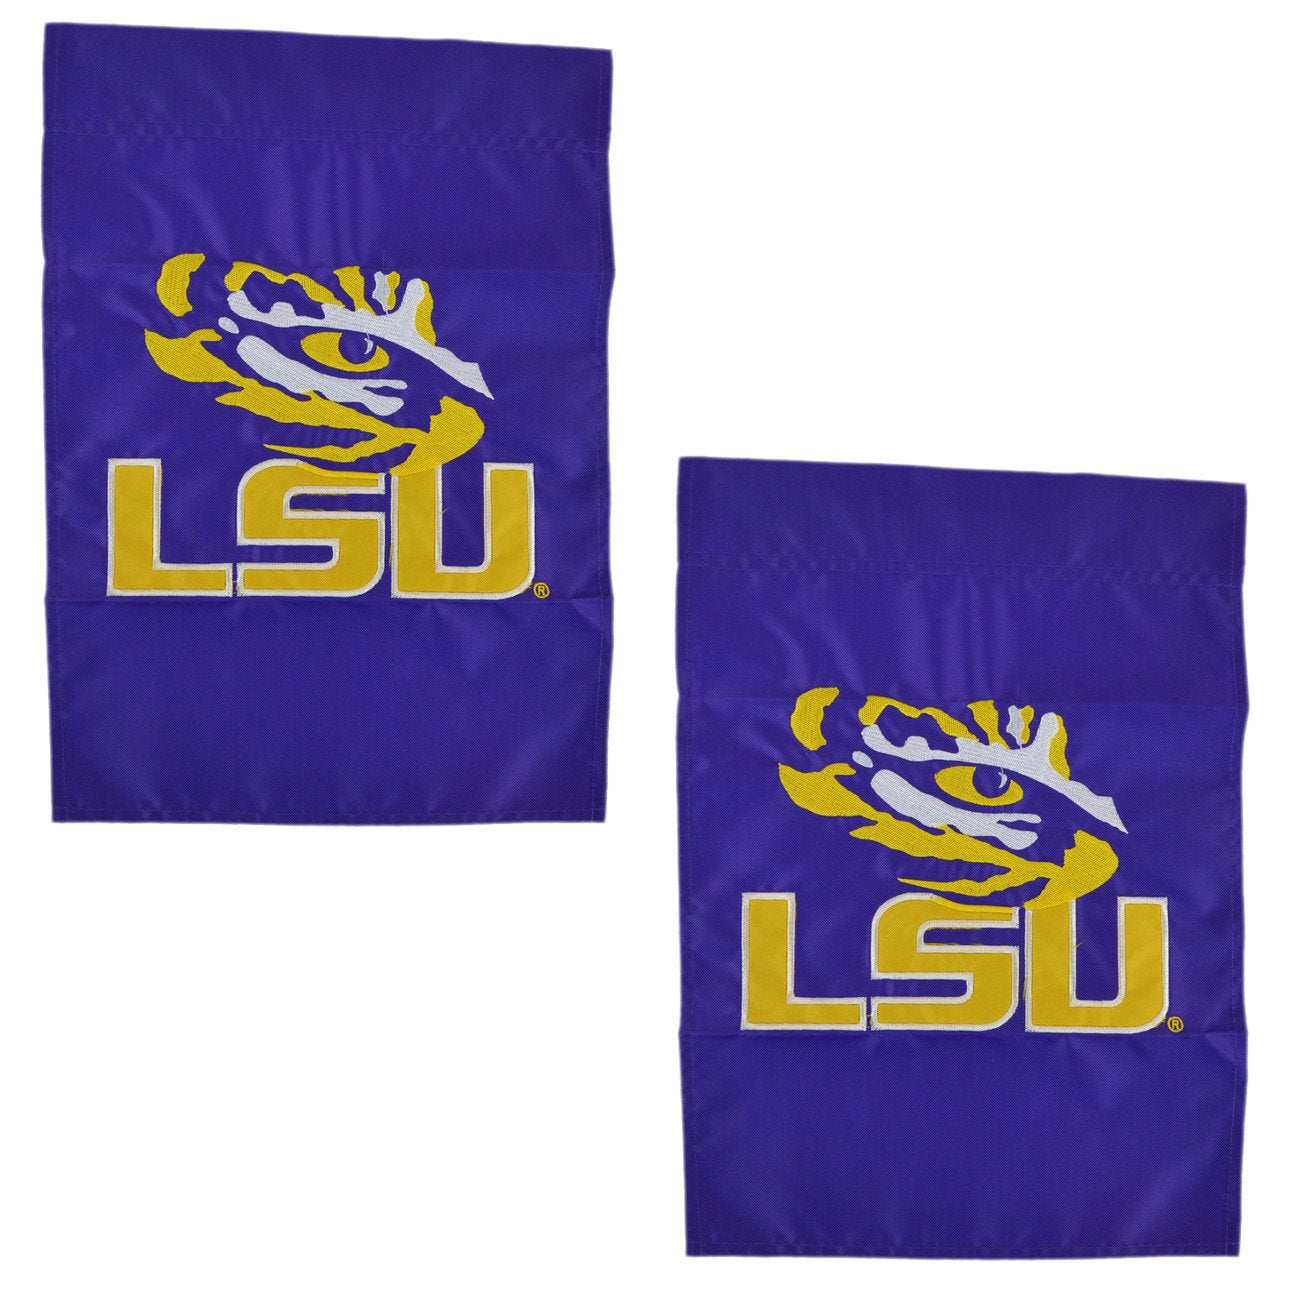 Party Animal Official National Collegiate Athletic Association Fan Shop Authentic NCAA 2-Pack Mini Embroidery Garden/Window Flag. Measures 15" x 10.5" with Window Hanger